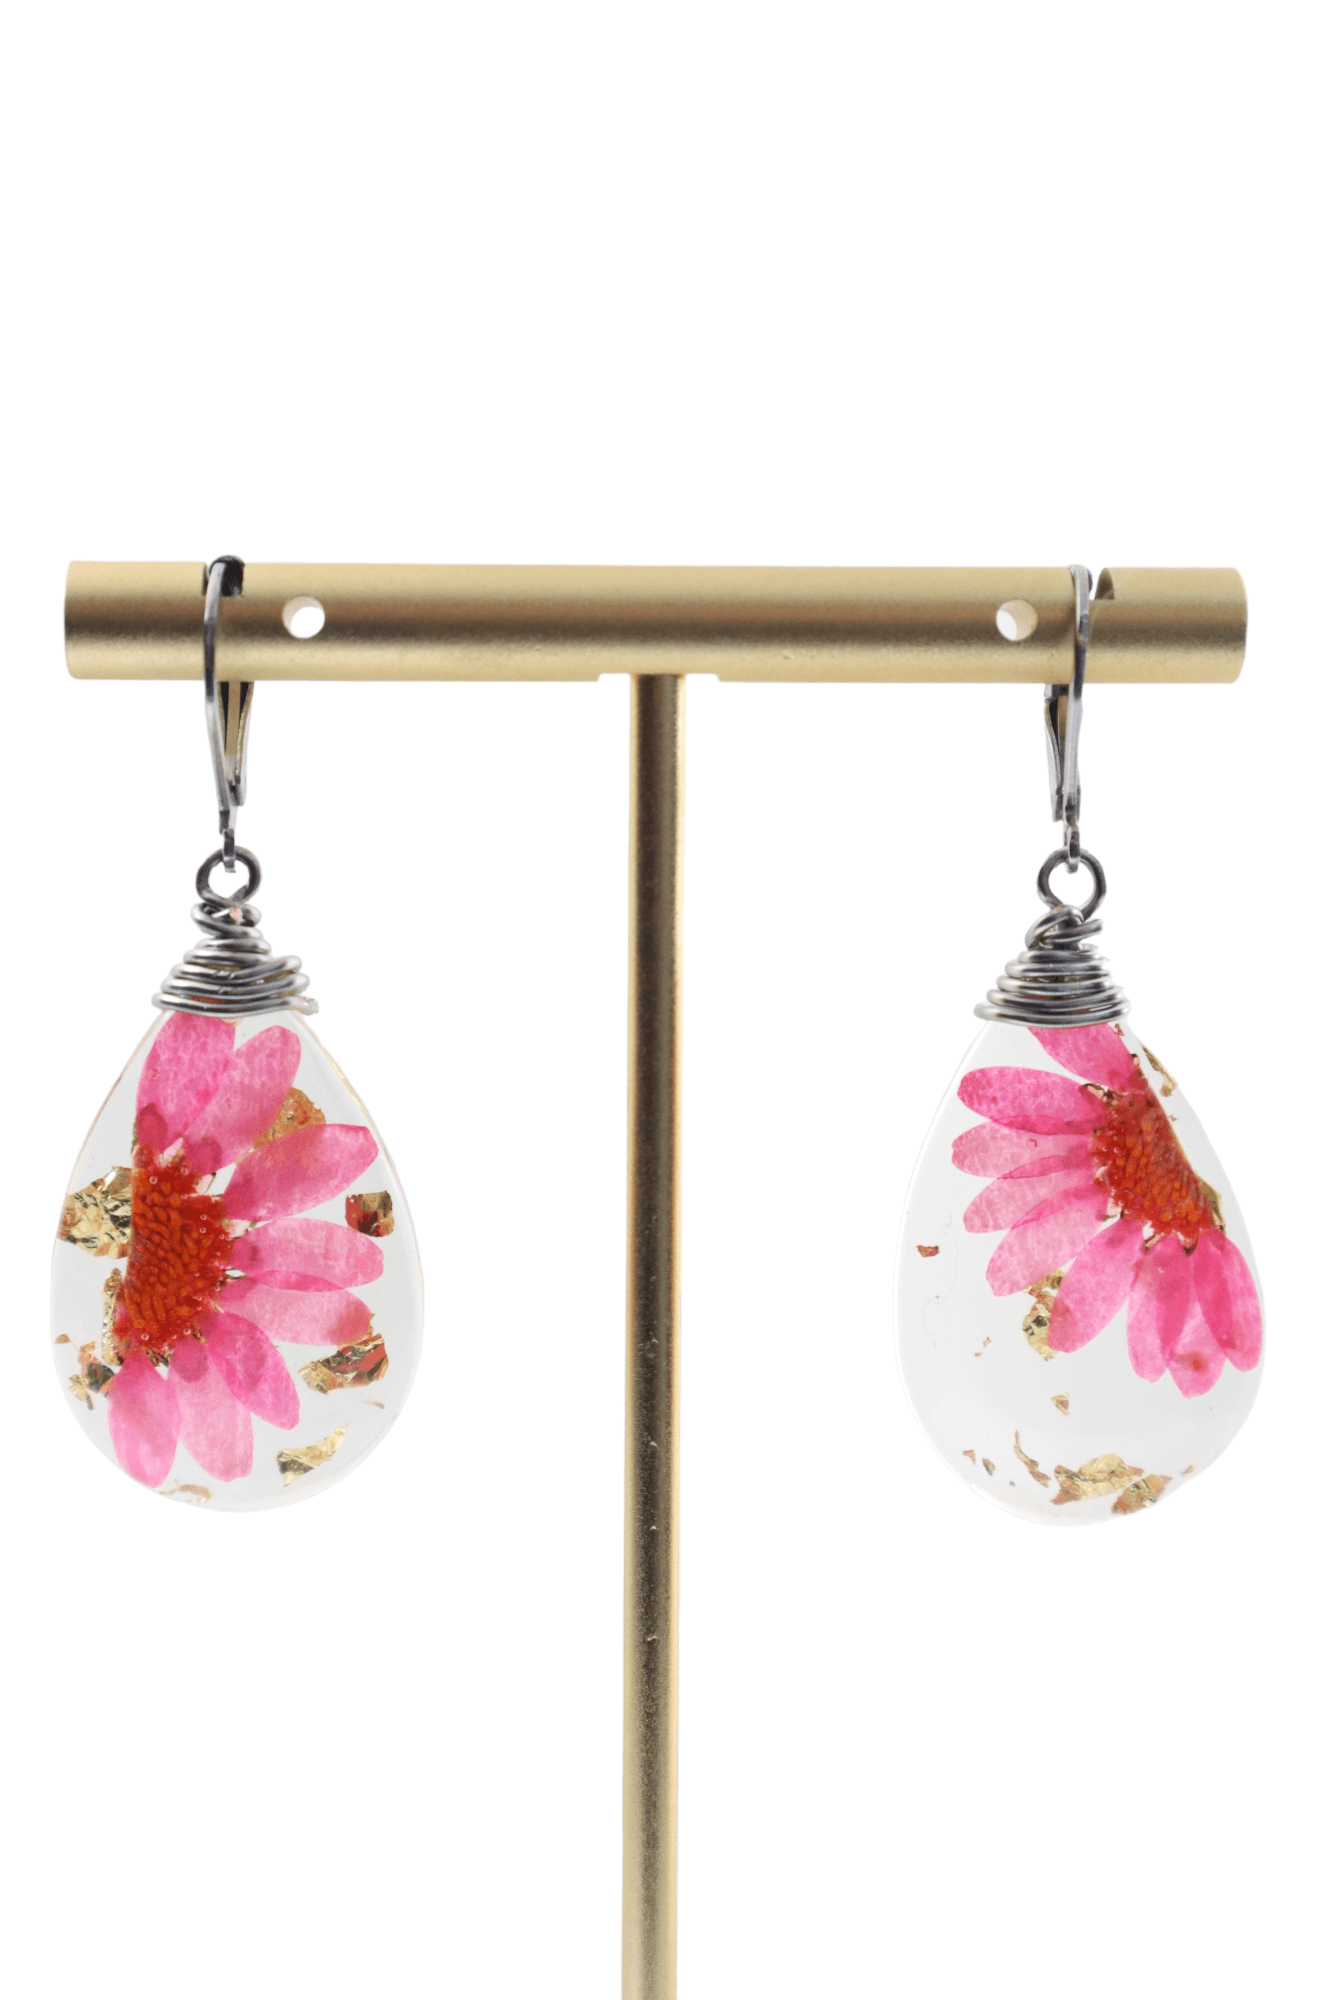 Flower-pressed-jewelry---earrings-with-flowers---flower-jewelry---Kaleidoscopes-And-Polka-Dots